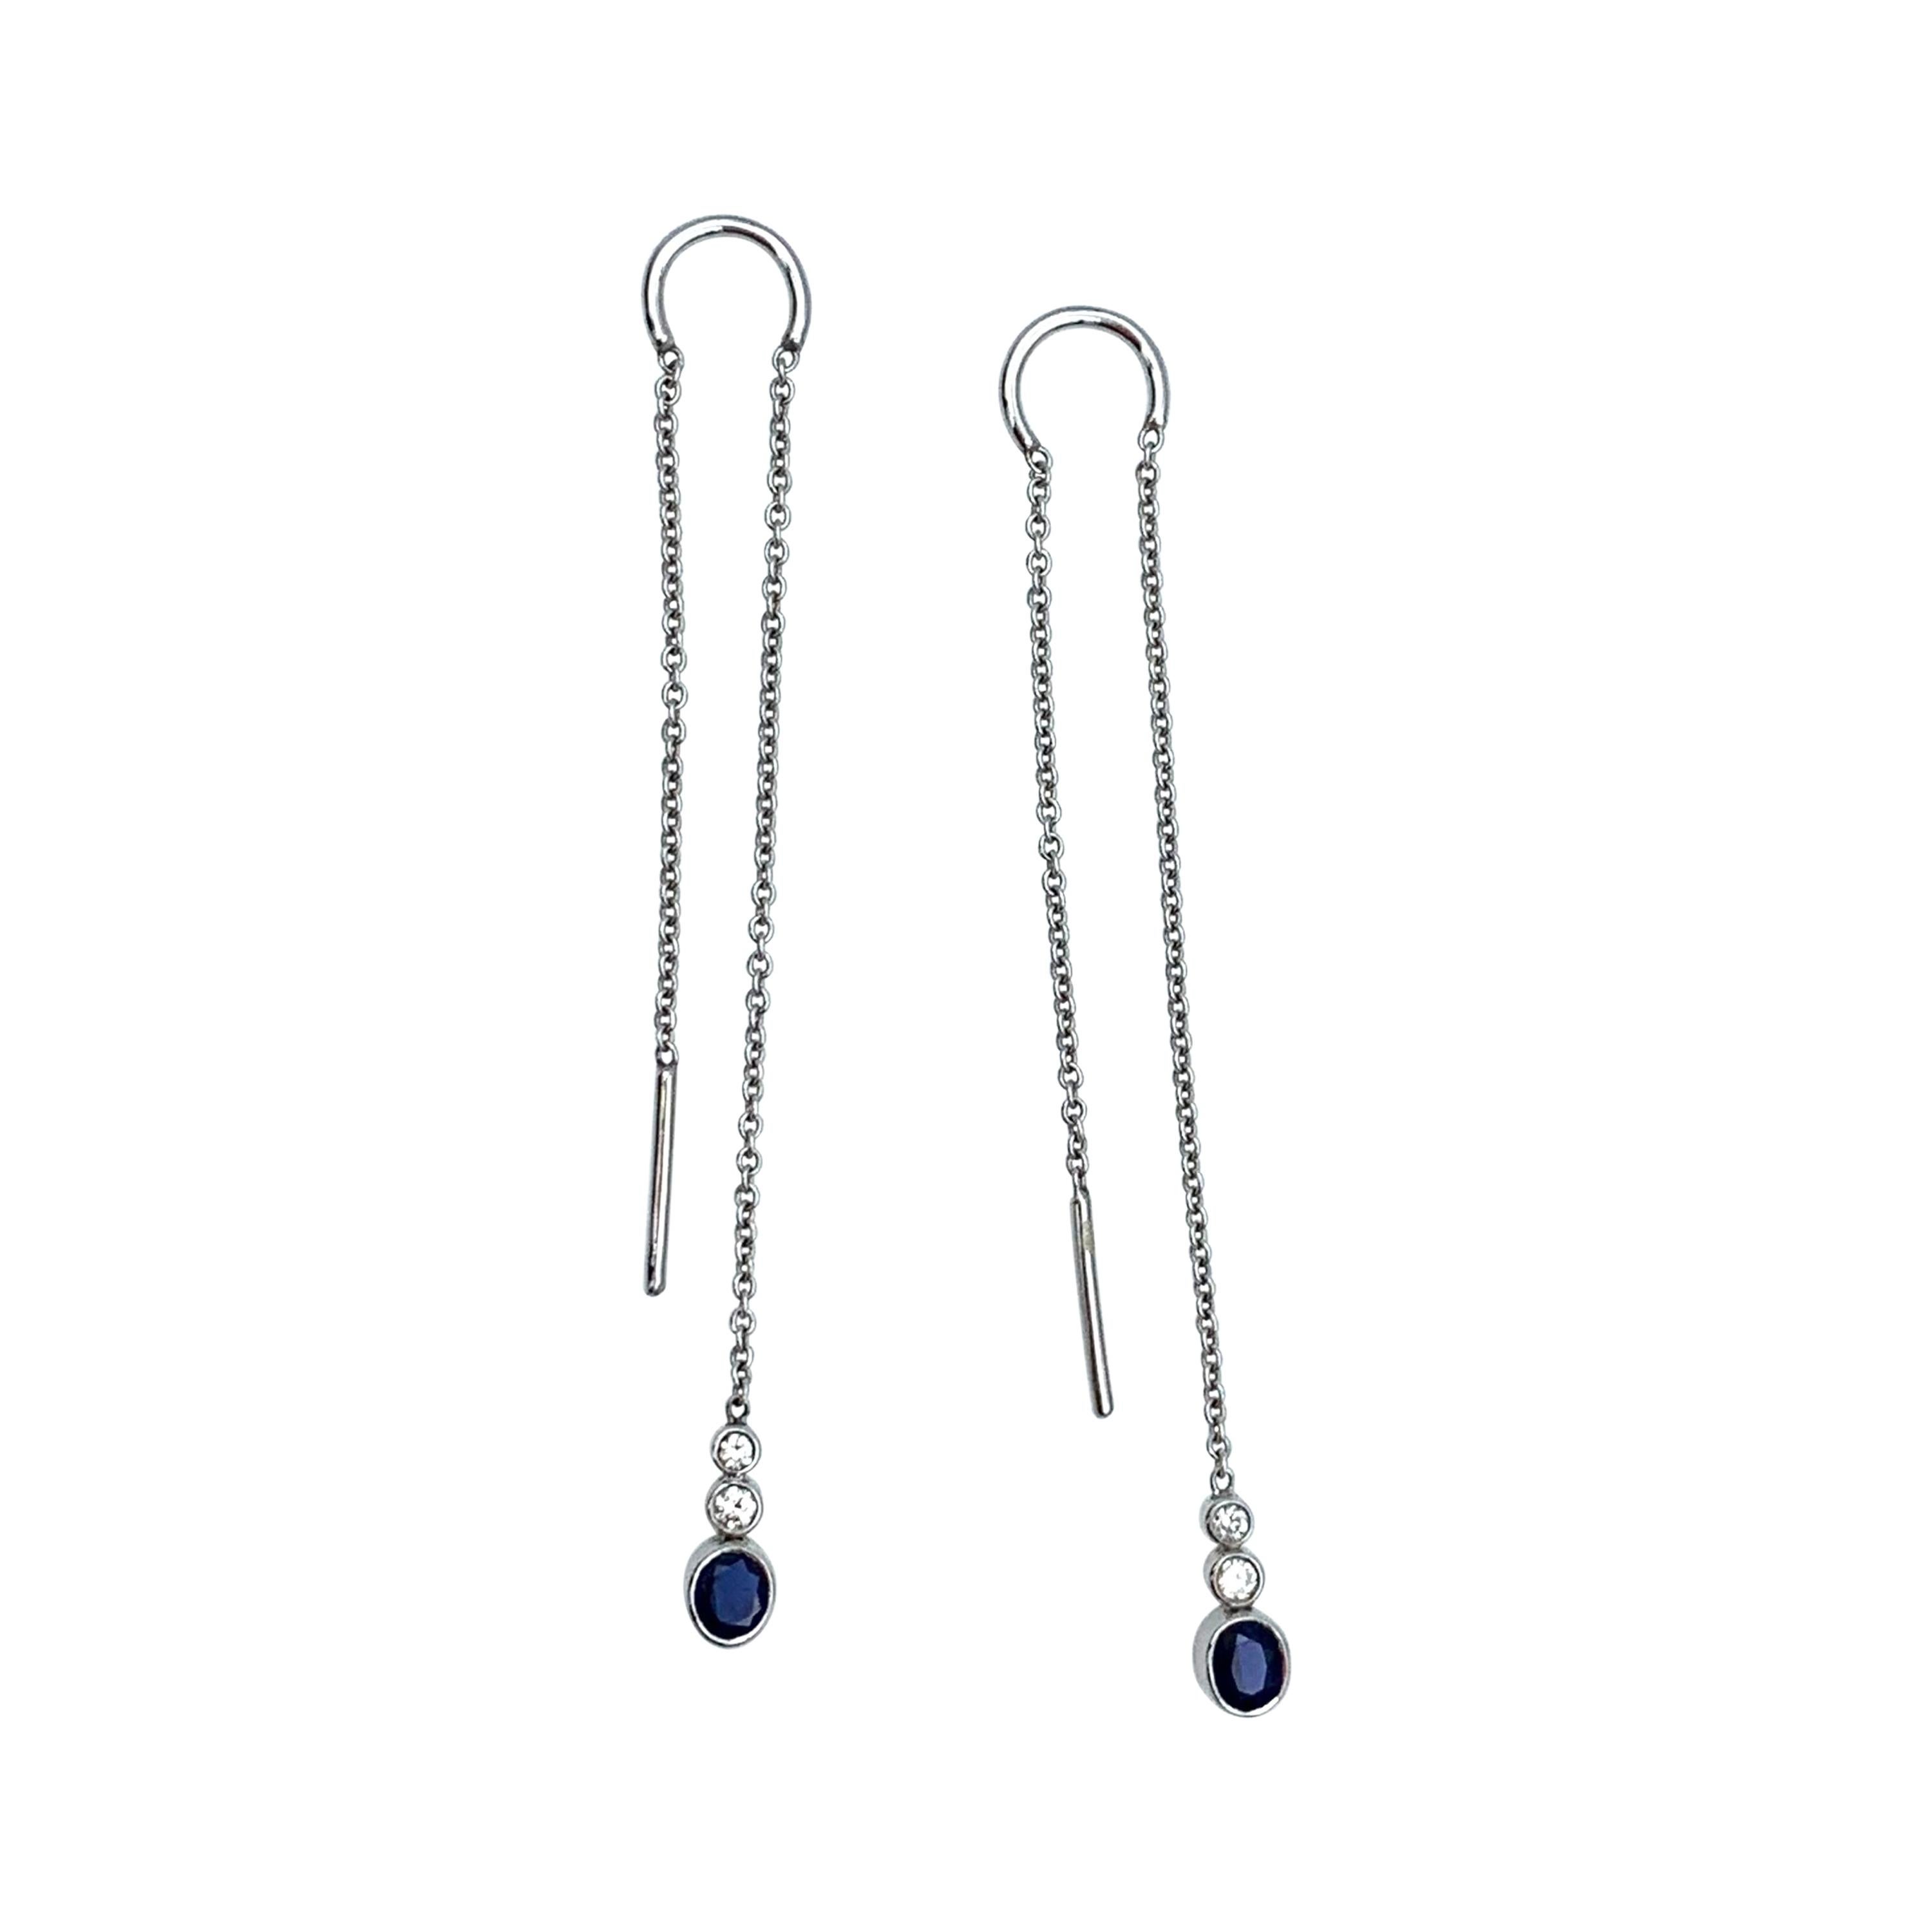 White Gold Threadthrough Earrings in Blue Oval Sapphire and Diamonds